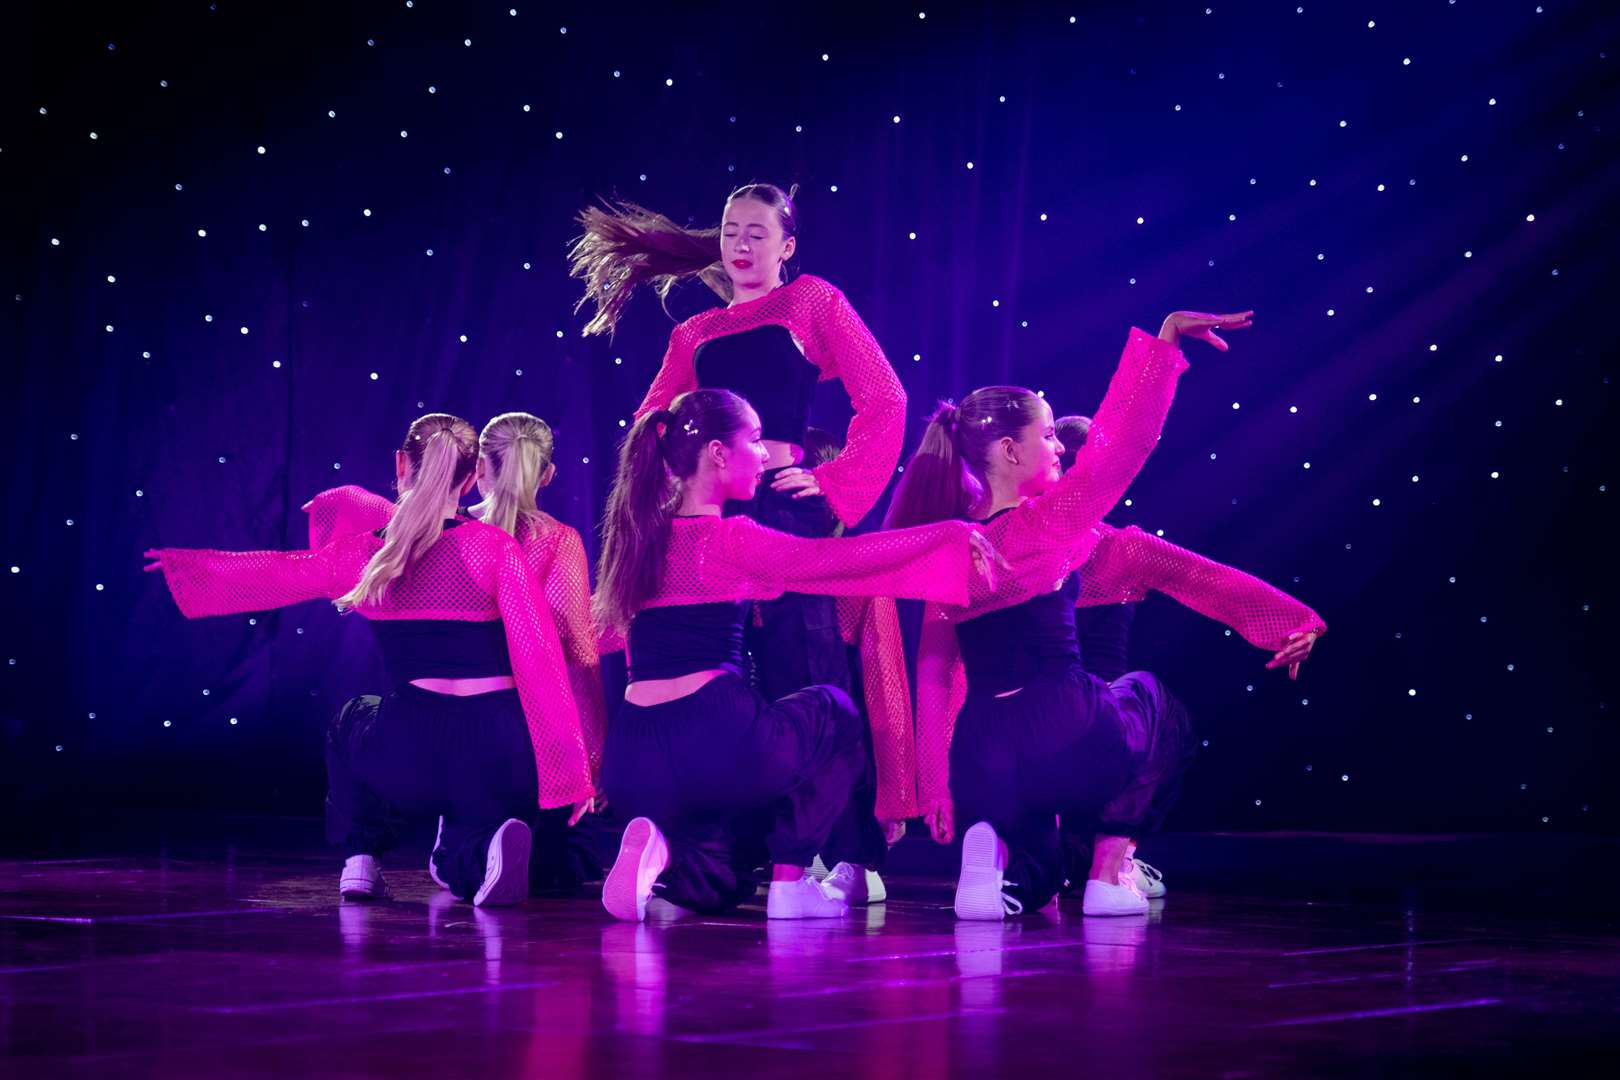 Local dance groups took part in the opening show. Picture: Callum Mackay.